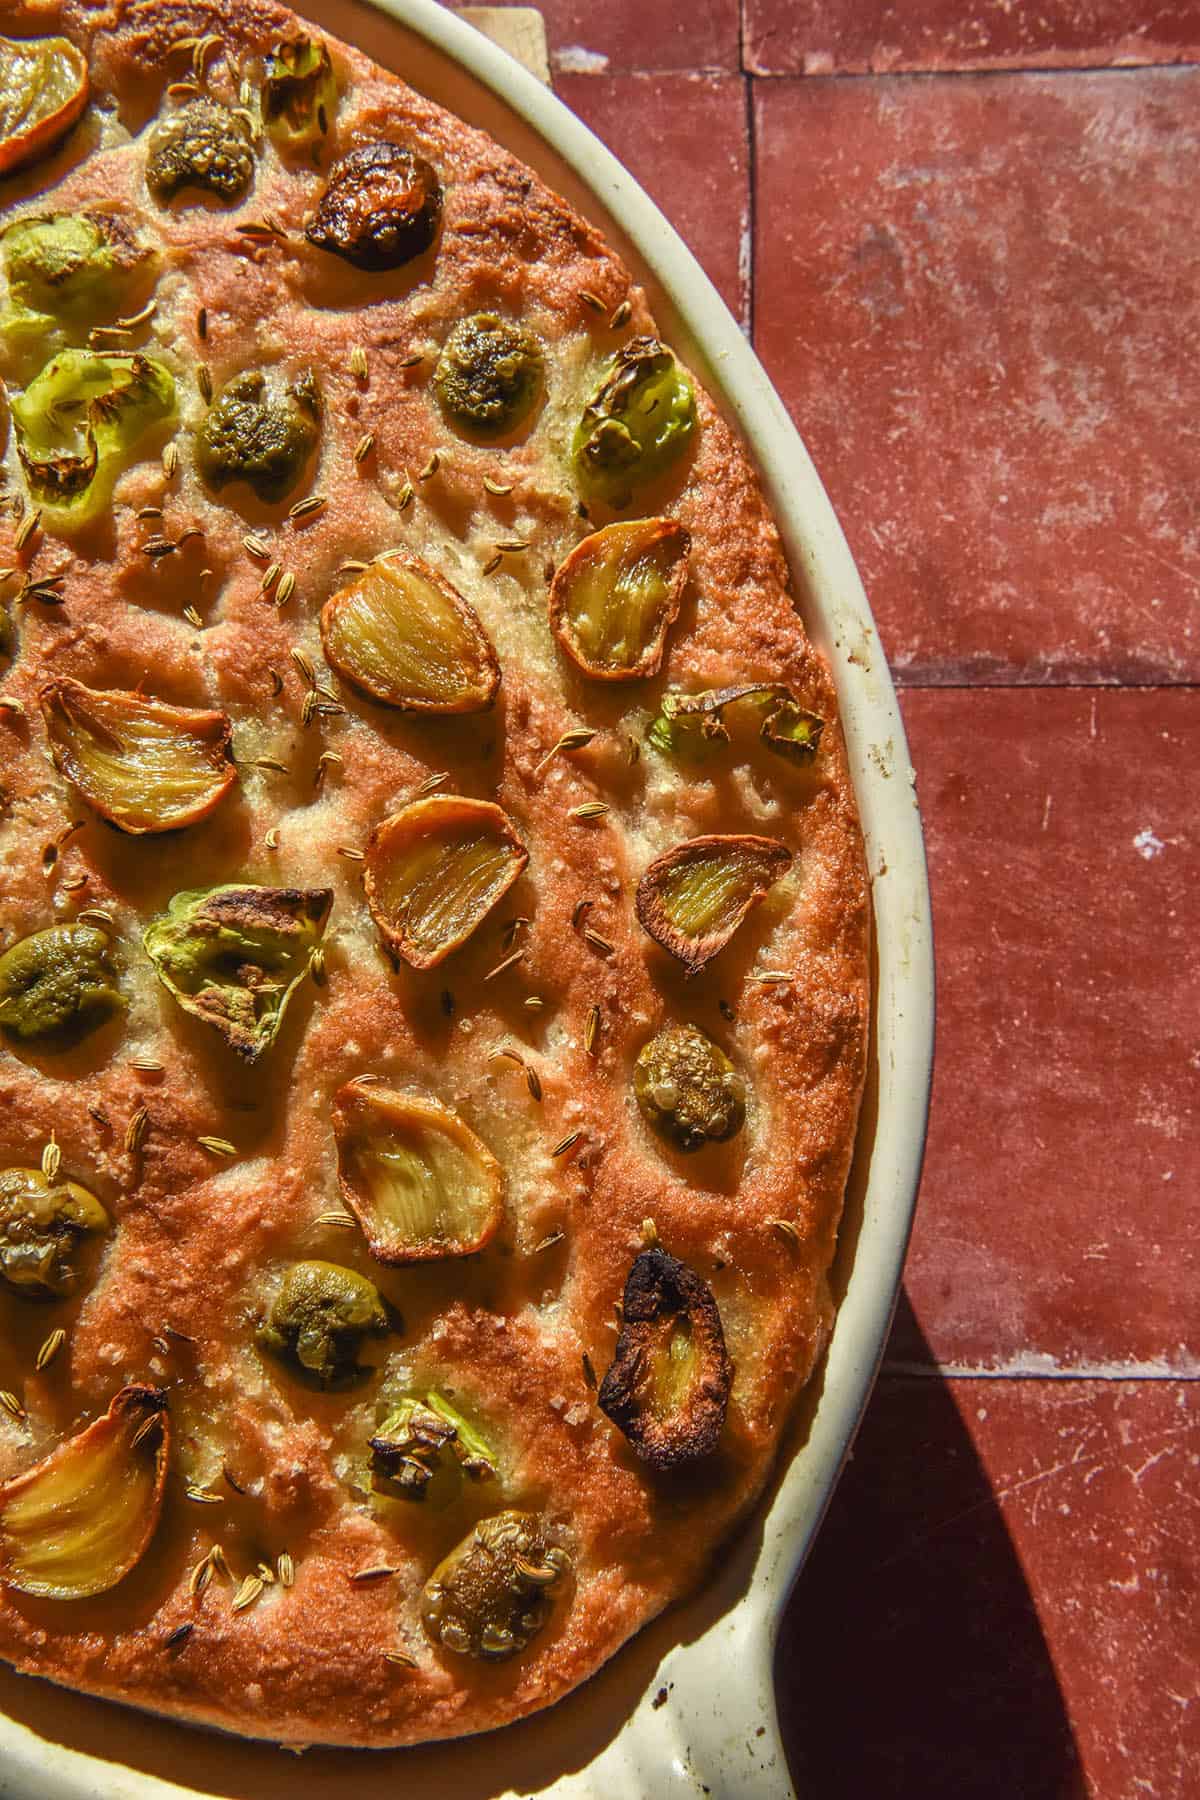 An aerial image of a golden brown gluten free focaccia topped with pickled roasted garlic, olives, pickled peppers and fennel seeds. The focaccia sits in a white ceramic baking dish atop terracotta tiles